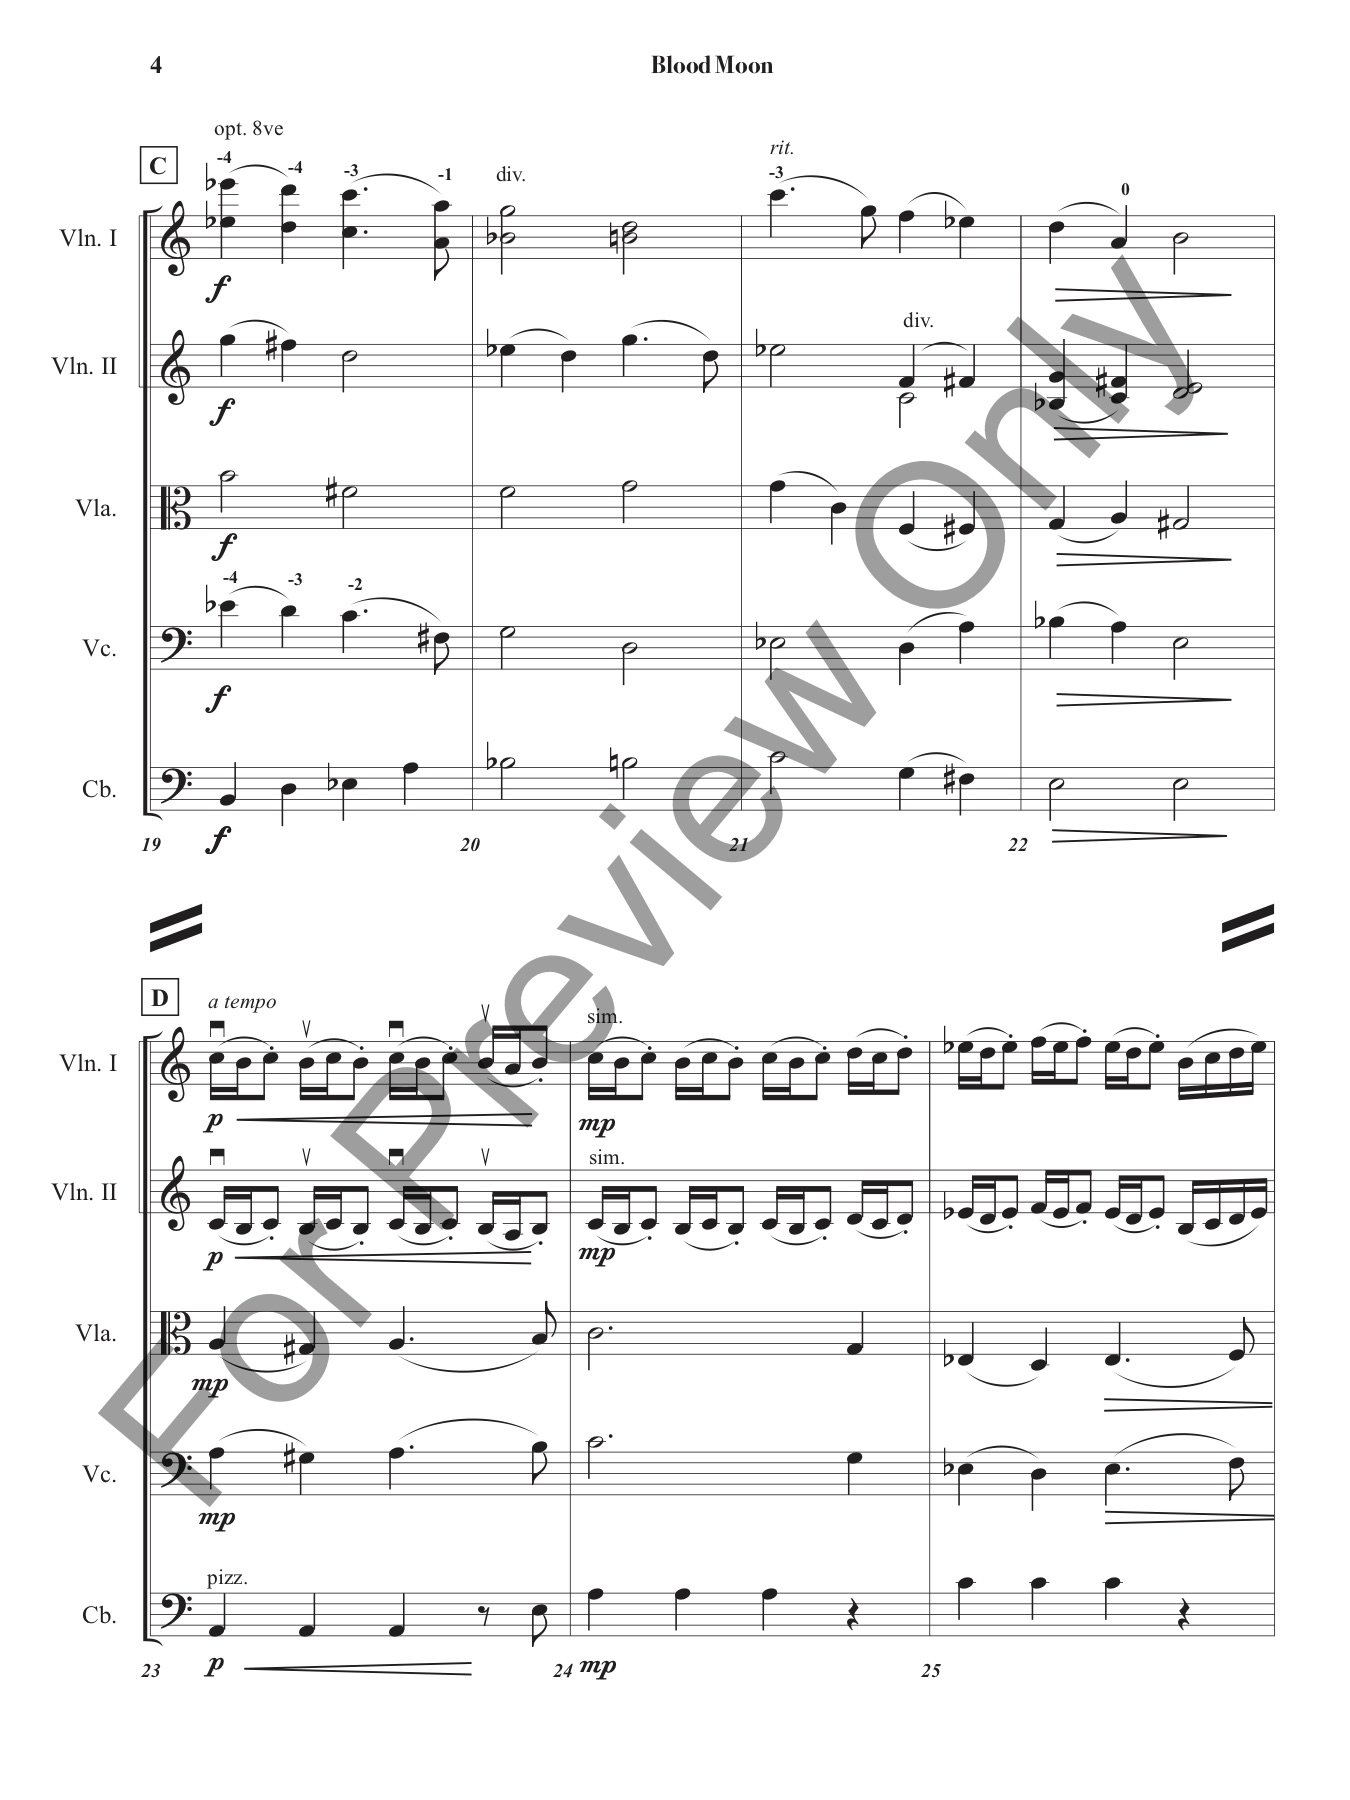 Blood Moon for String Orchestra - Cover Page and Full Score Only (for Preview Only p6).jpg